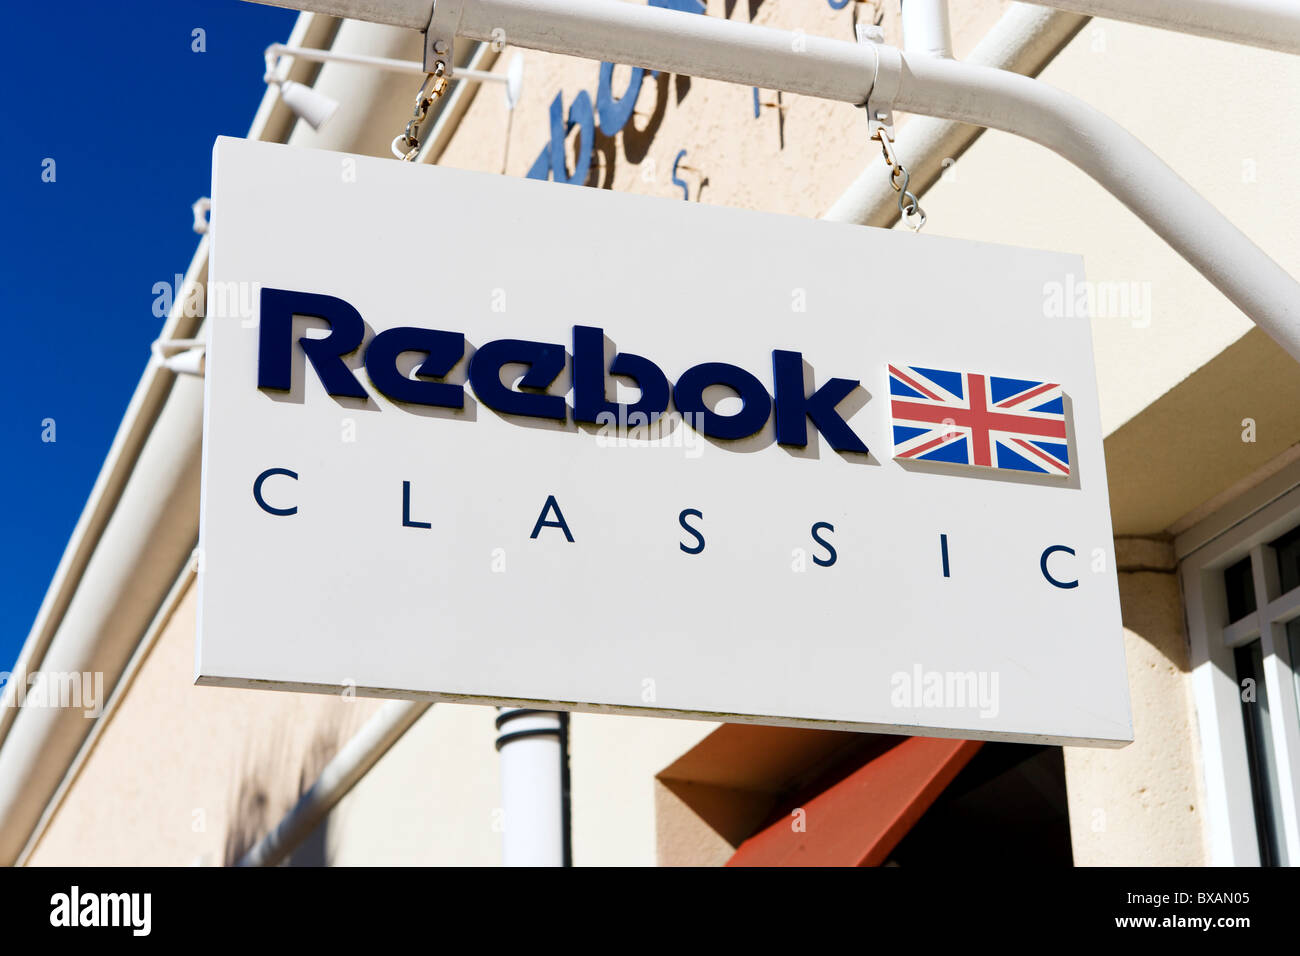 Reebok store hi-res stock photography and images - Alamy